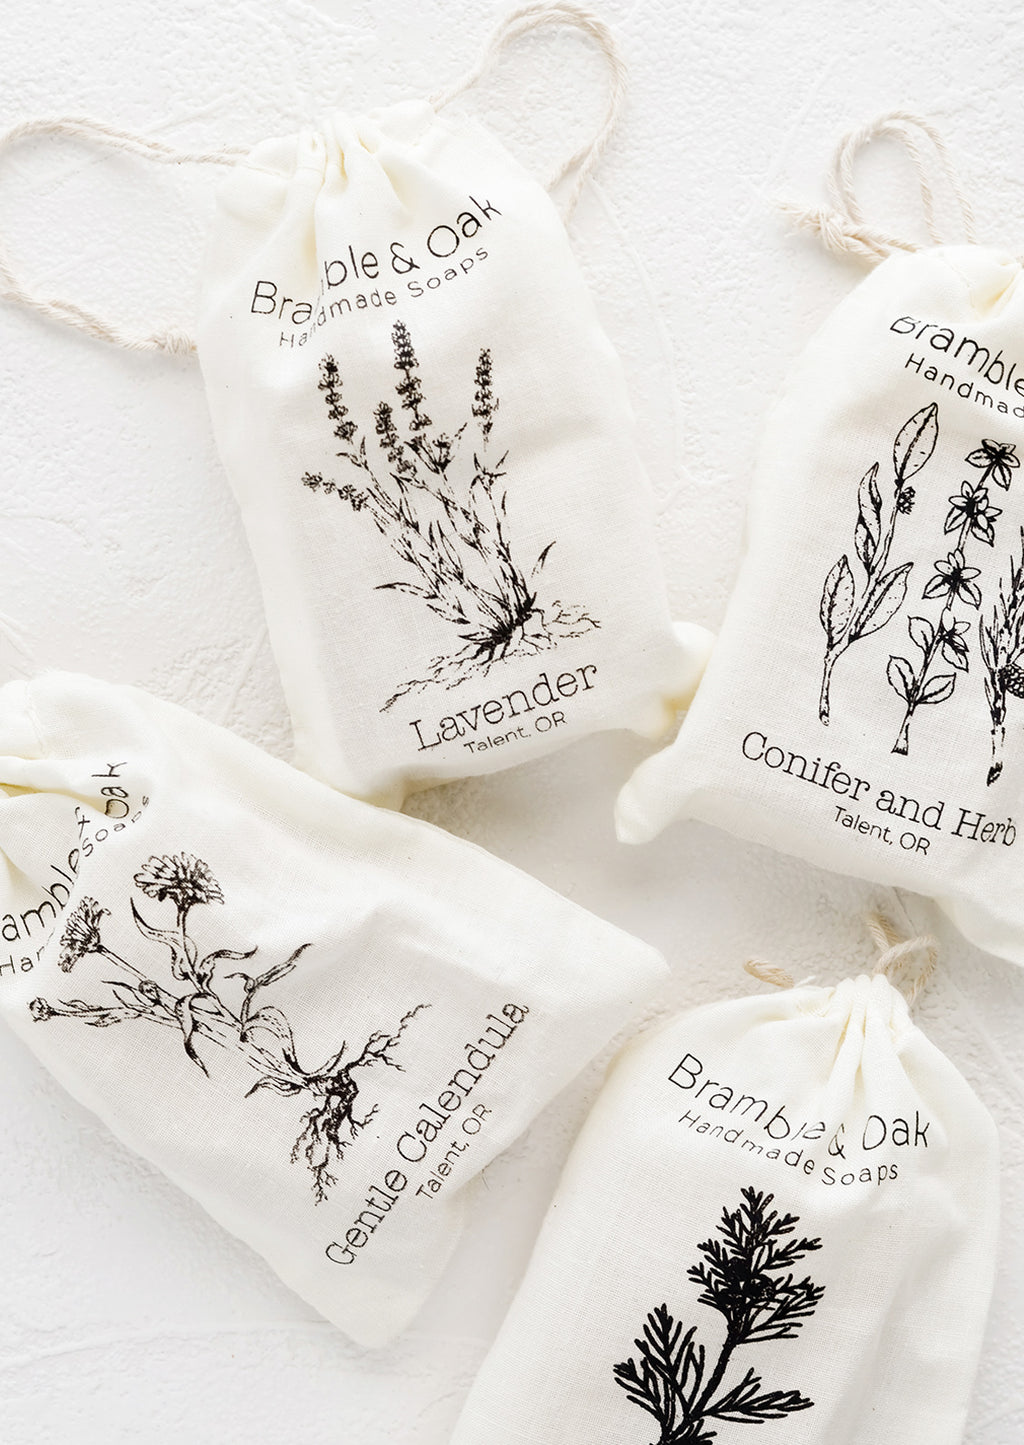 Lavender: Muslin bag packaging for bar soap with botanical imagery.